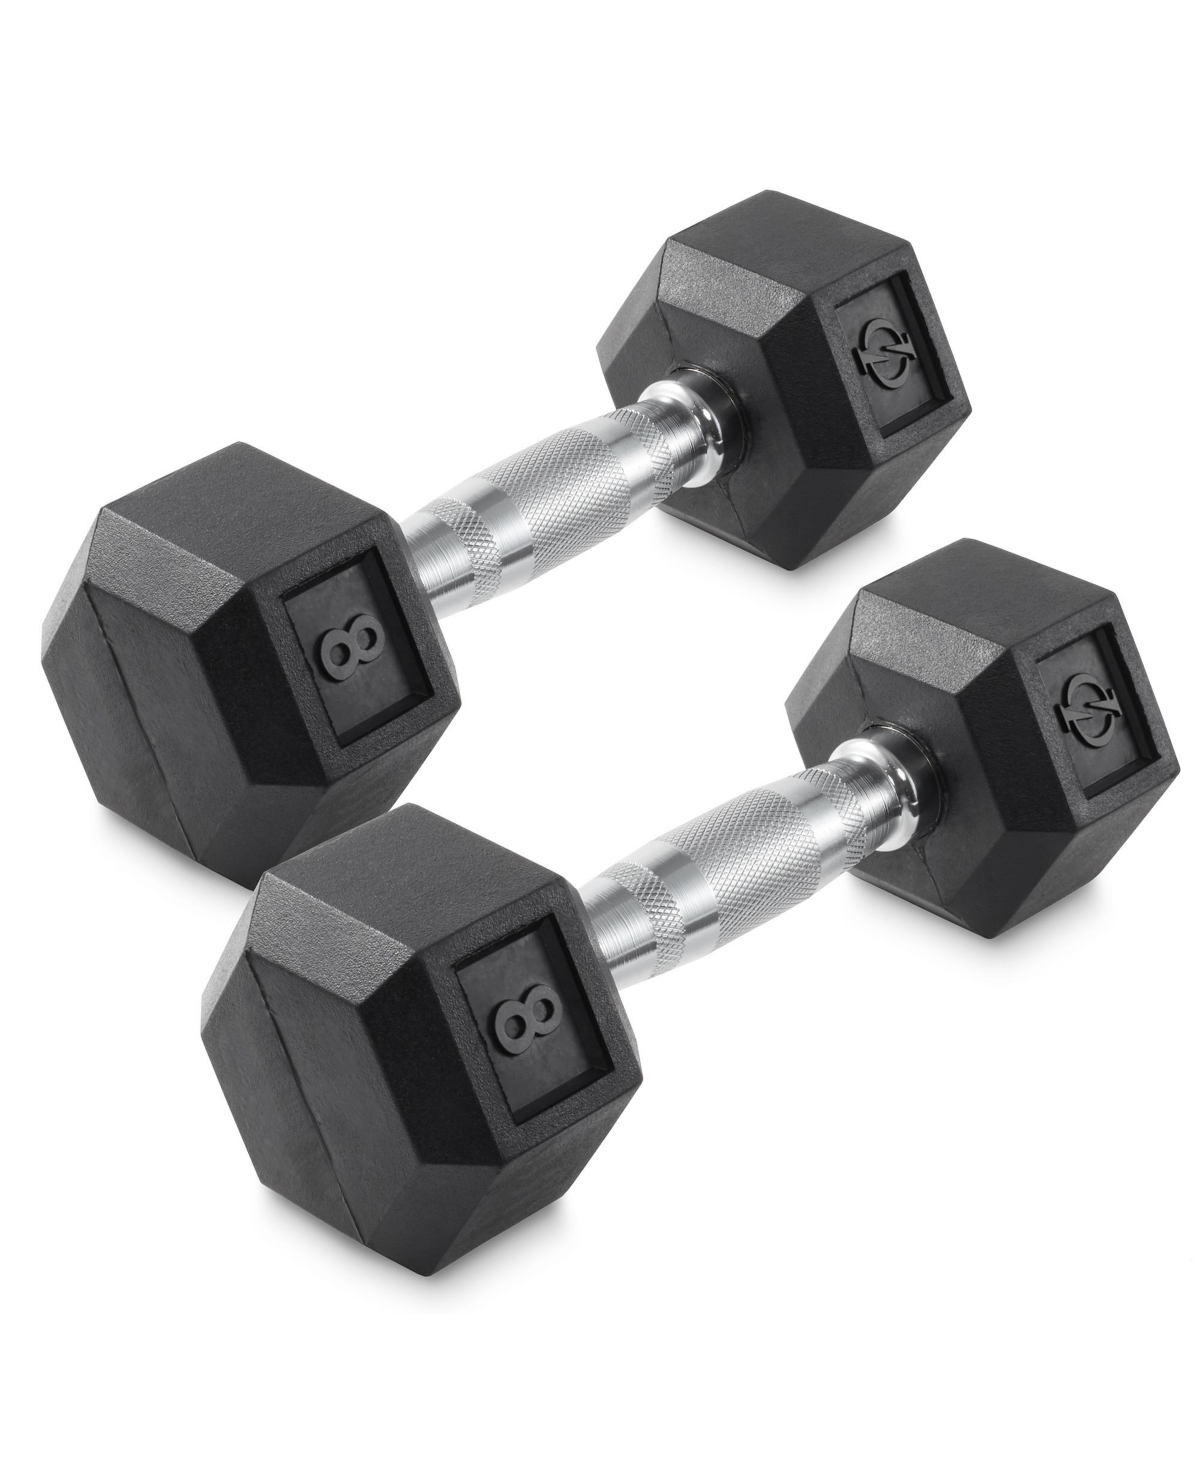 Rubber Coated Hex Dumbbell Hand Weights, 8 lb Pair - Black